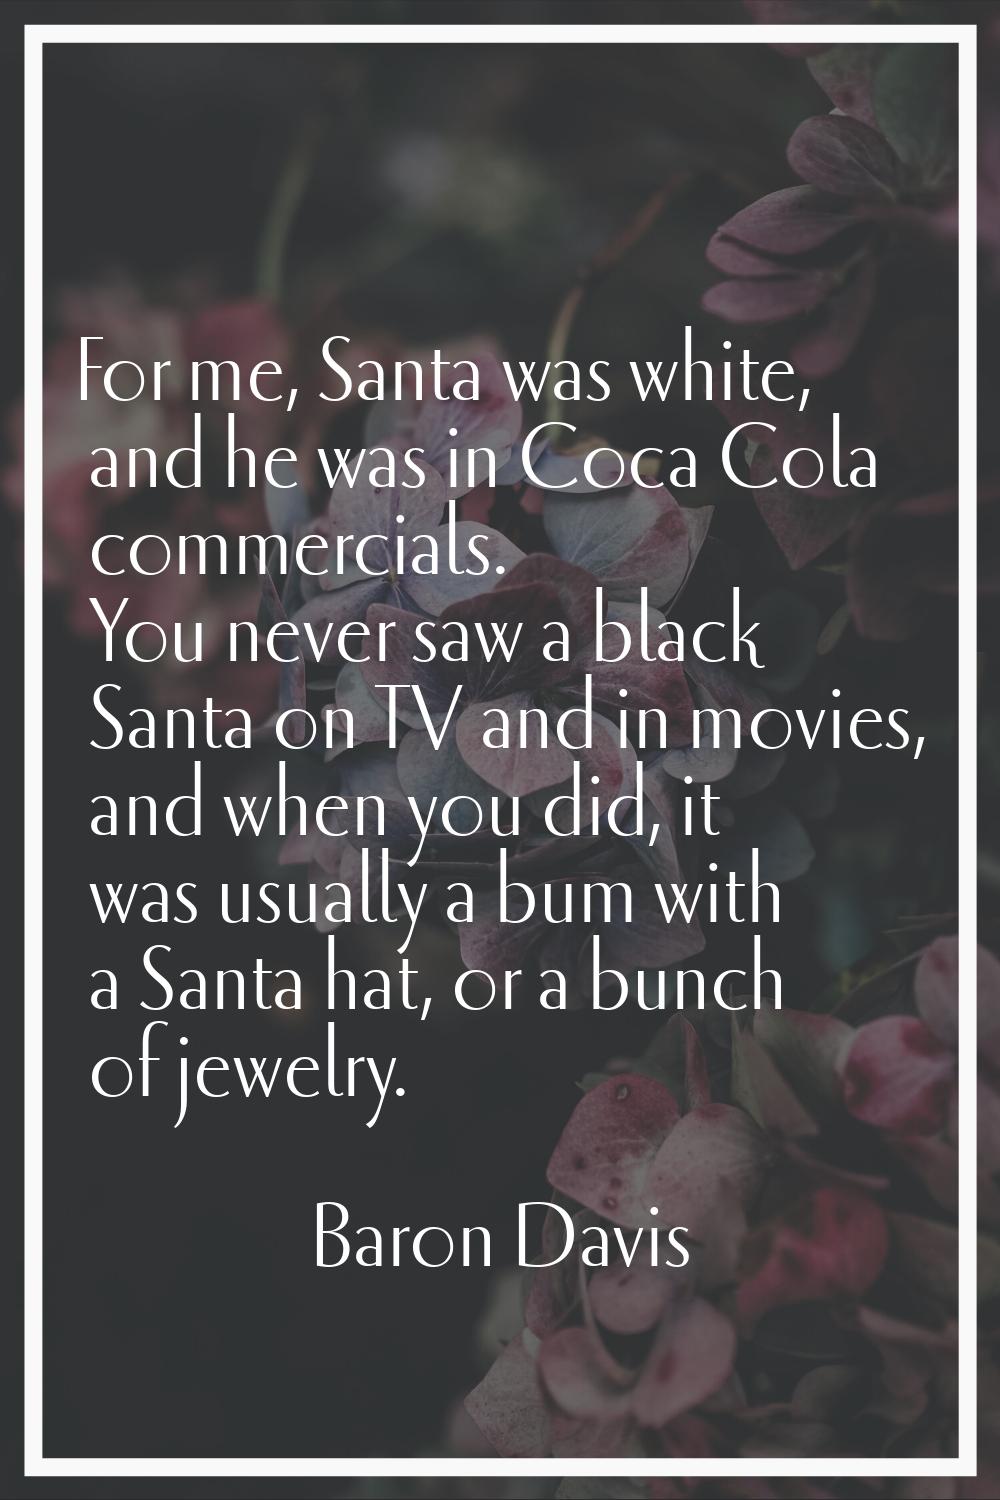 For me, Santa was white, and he was in Coca Cola commercials. You never saw a black Santa on TV and